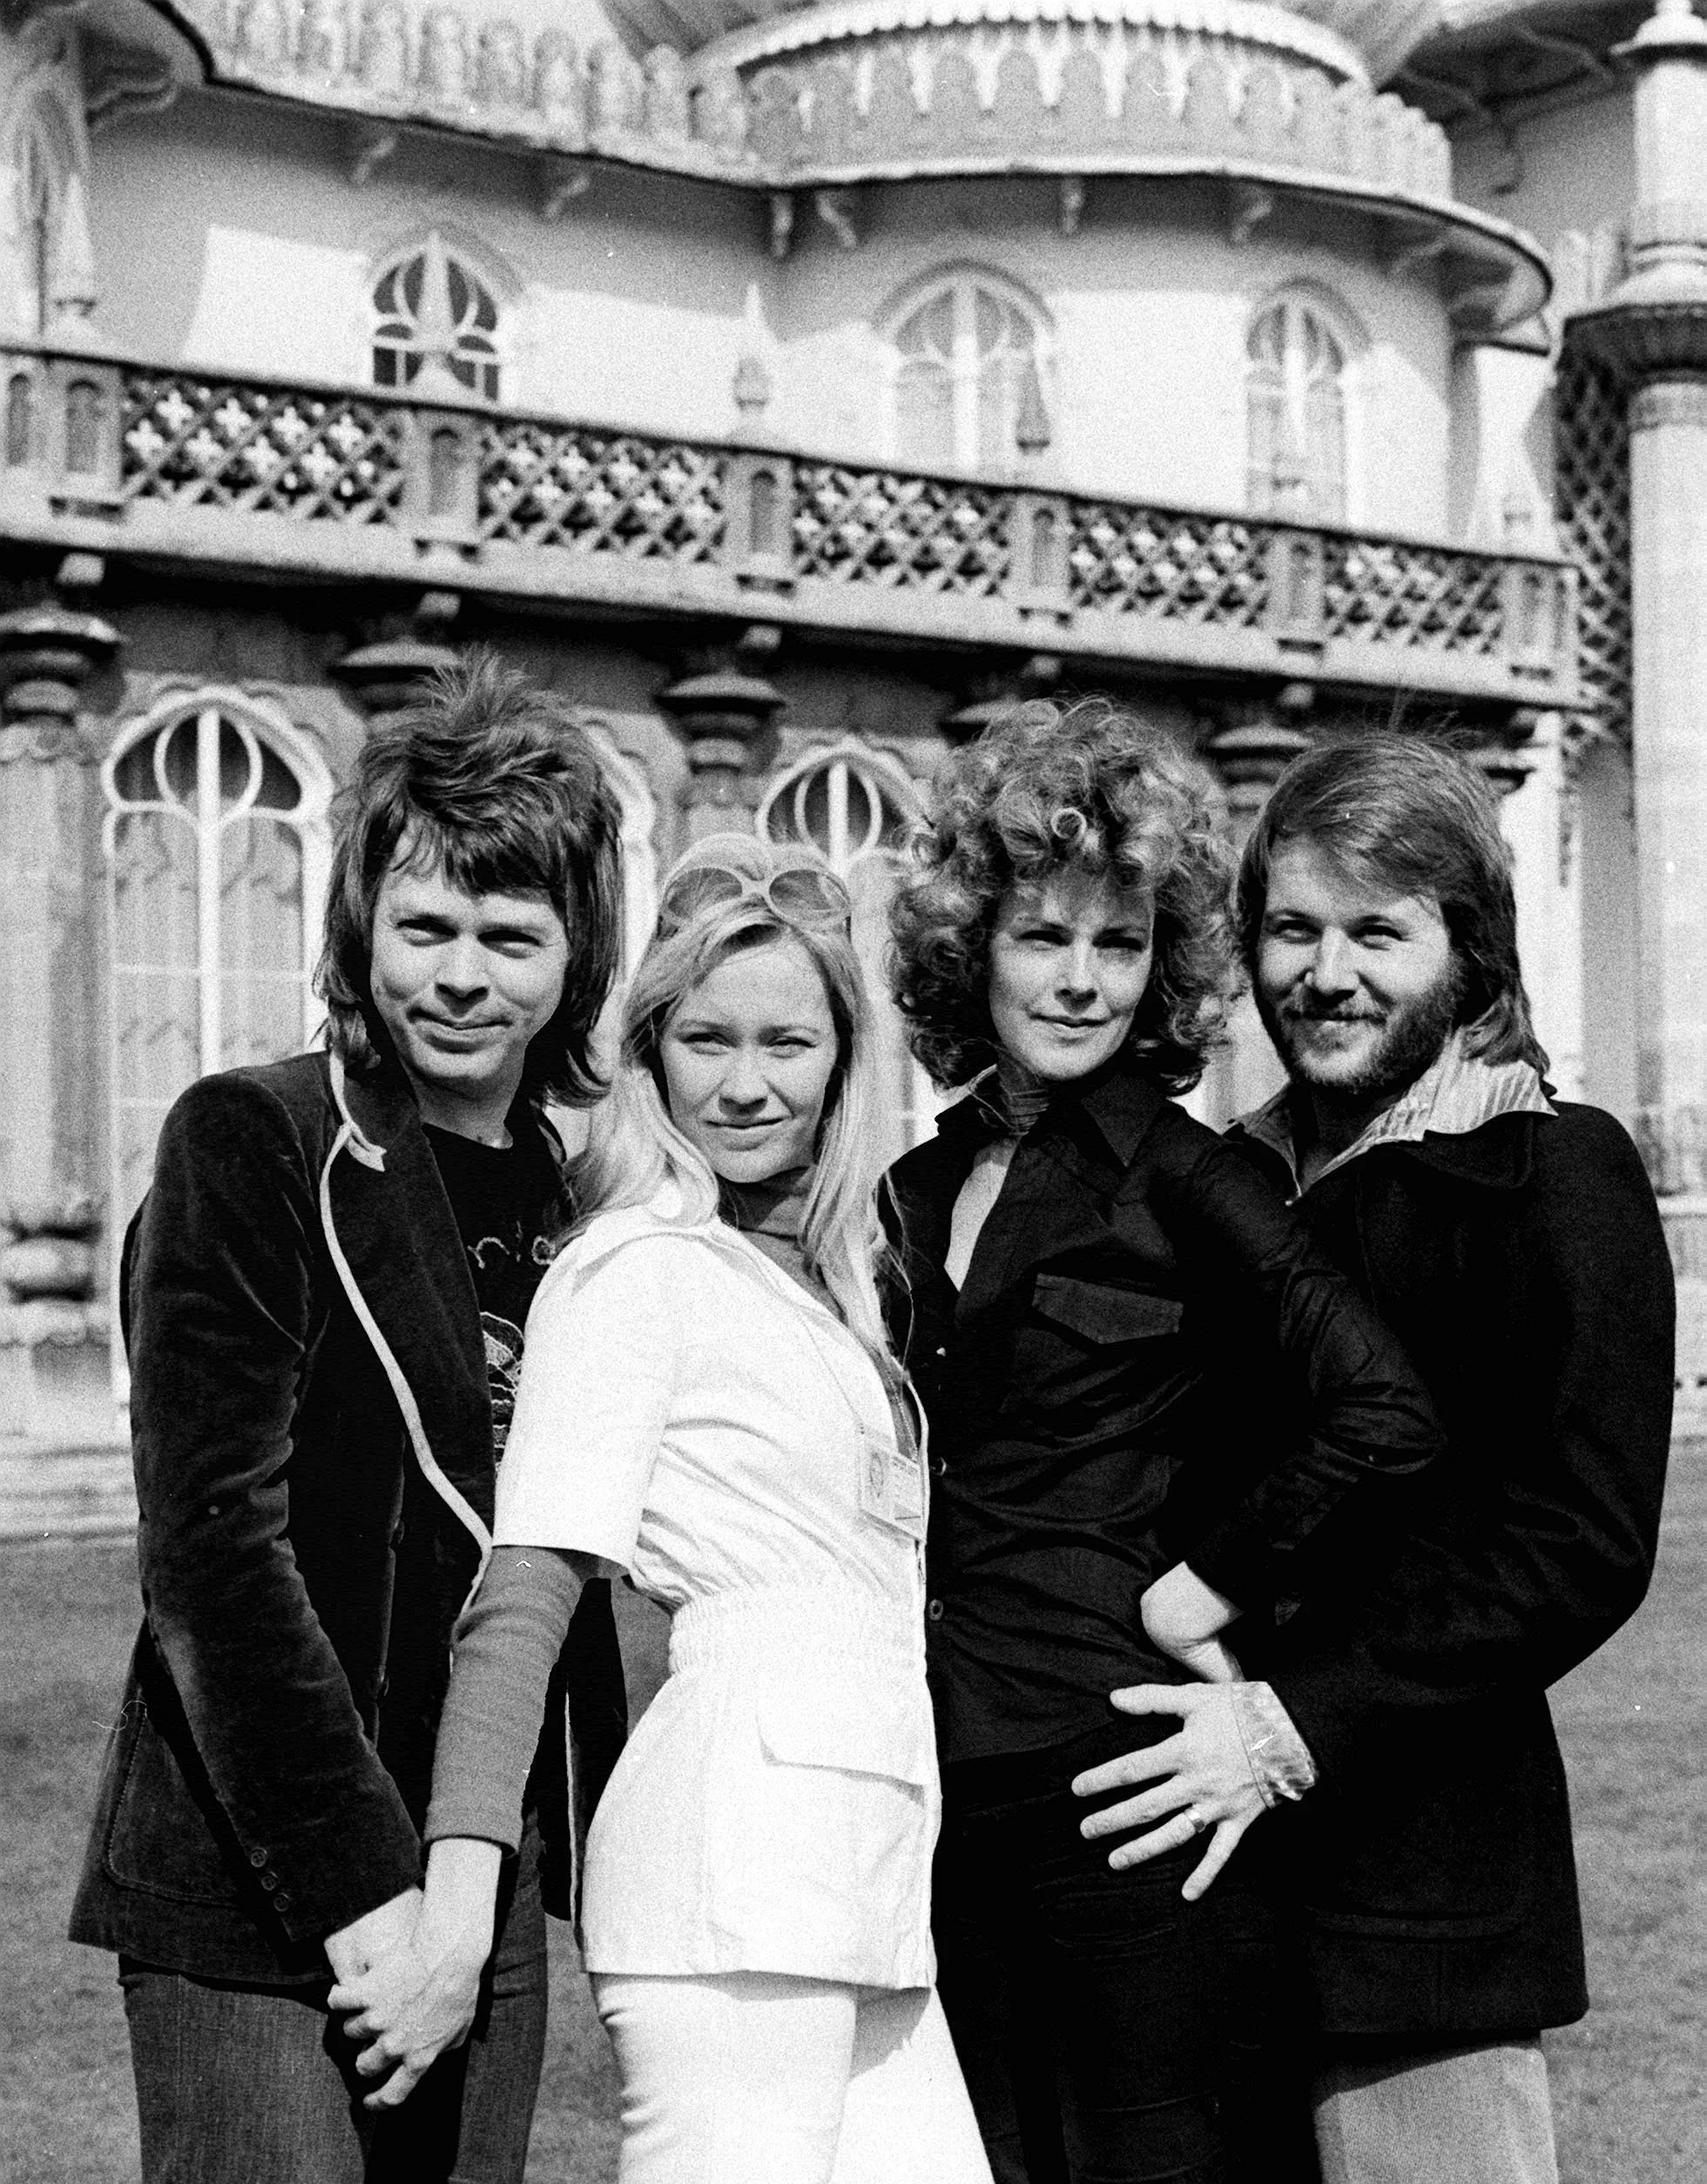 Black and white image of the group ABBA - 2 white men and 2 white women – standing on lawn in front of a large building. 